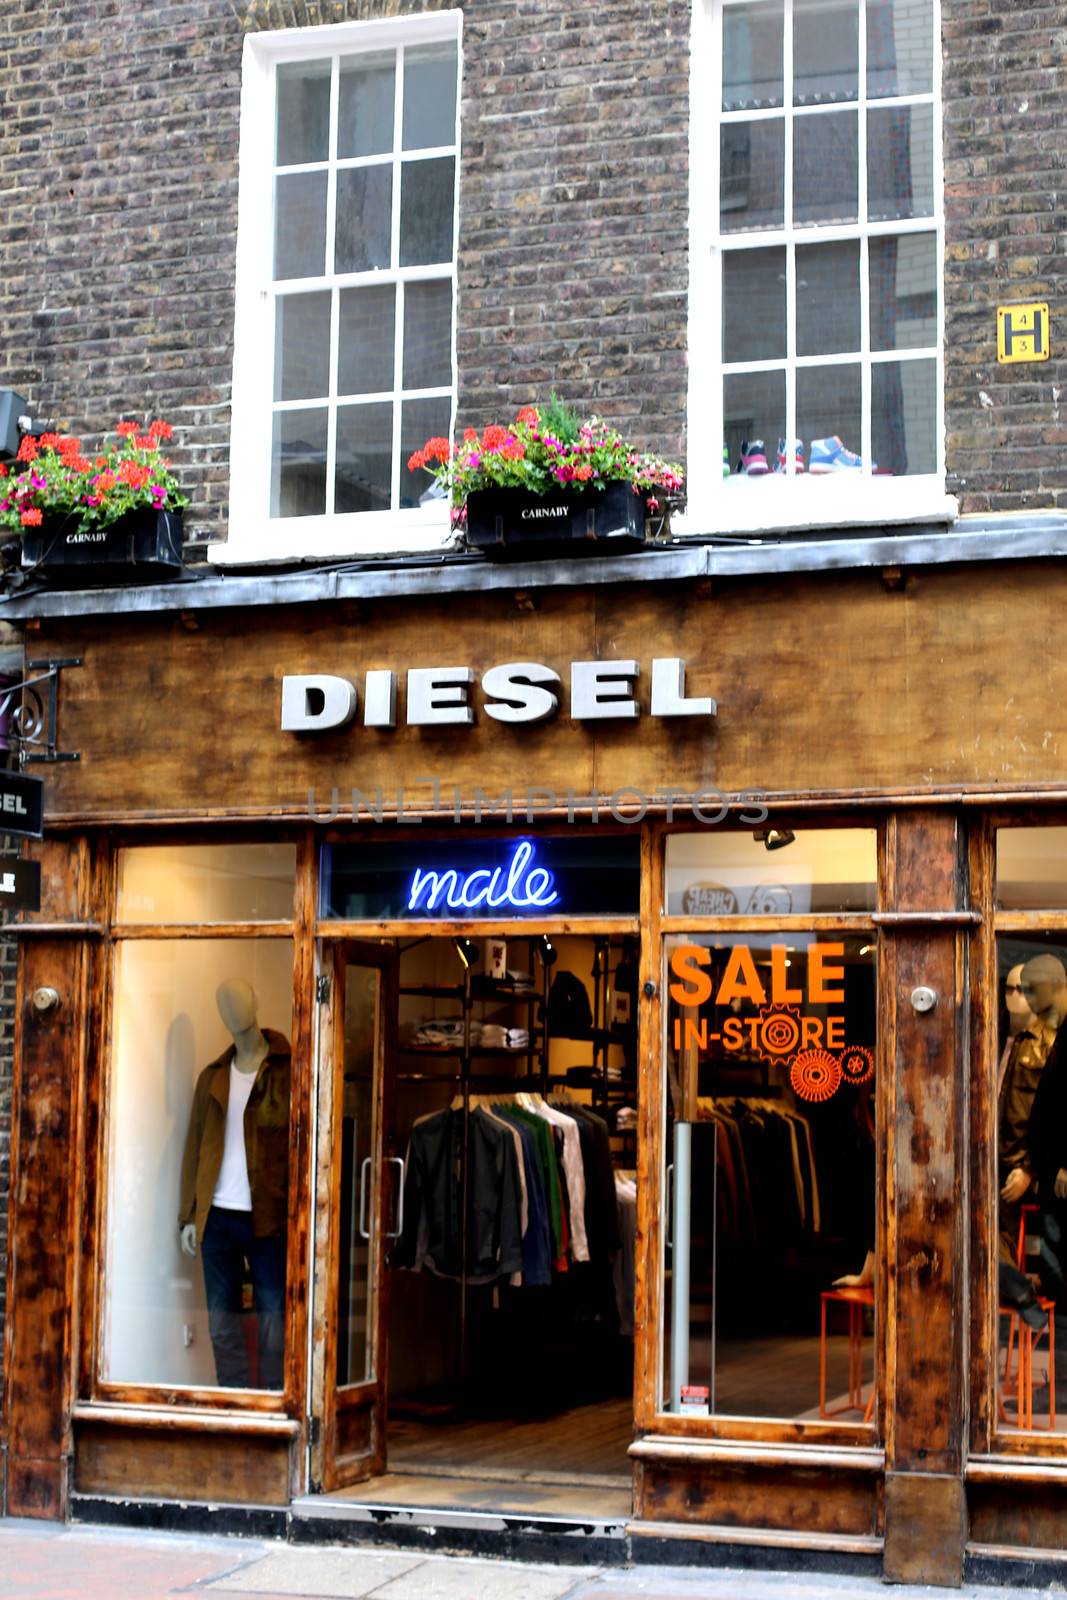 Diesel Shop Front Carnaby Street London by Whiteboxmedia